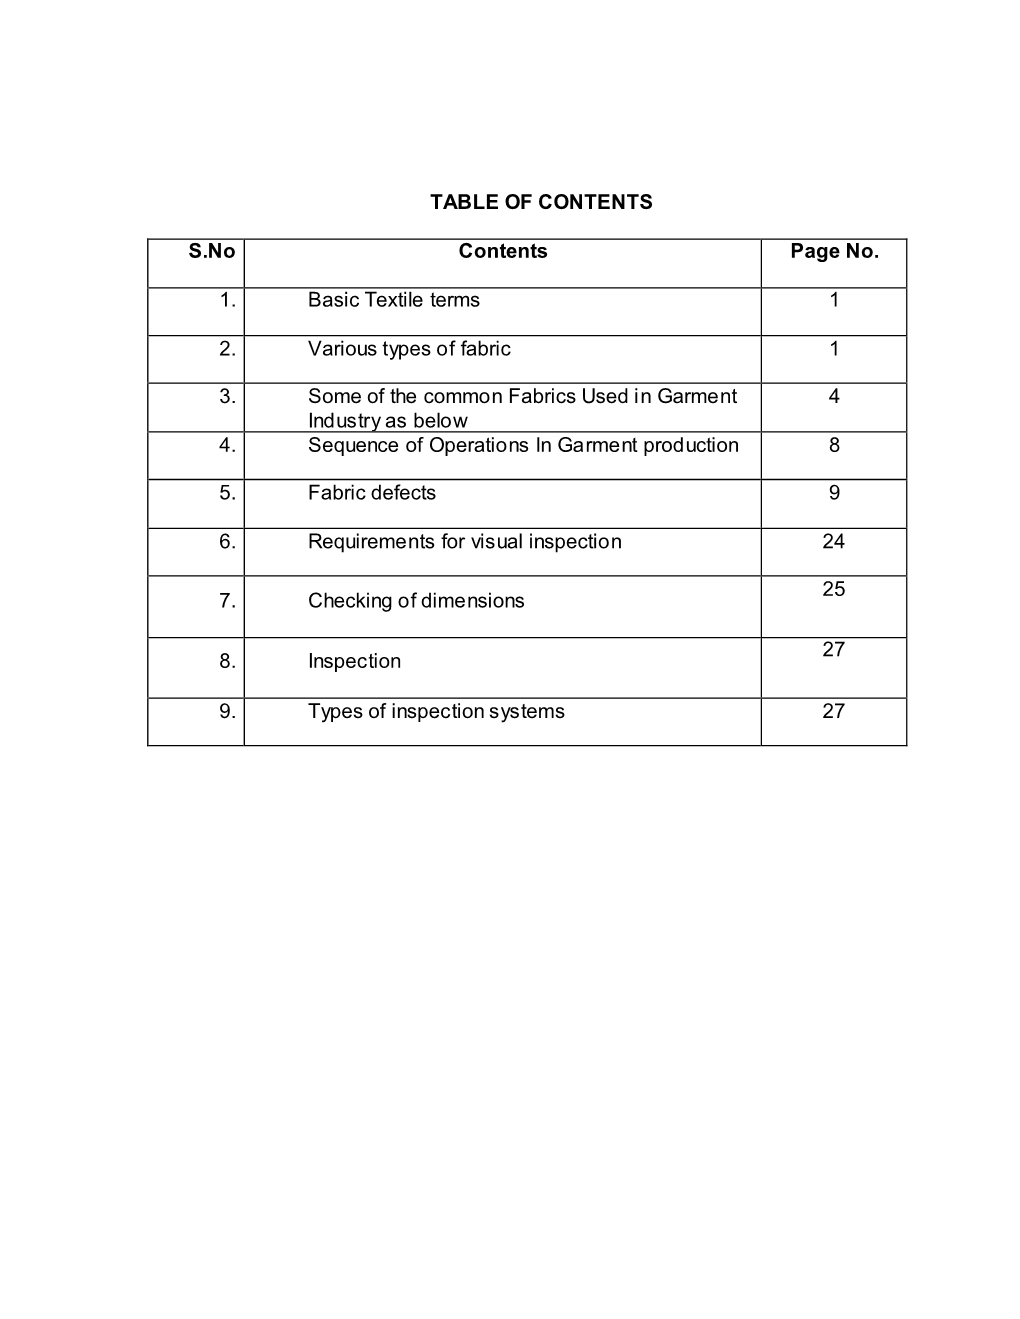 TABLE of CONTENTS S.No Contents Page No. 1. Basic Textile Terms 1 2